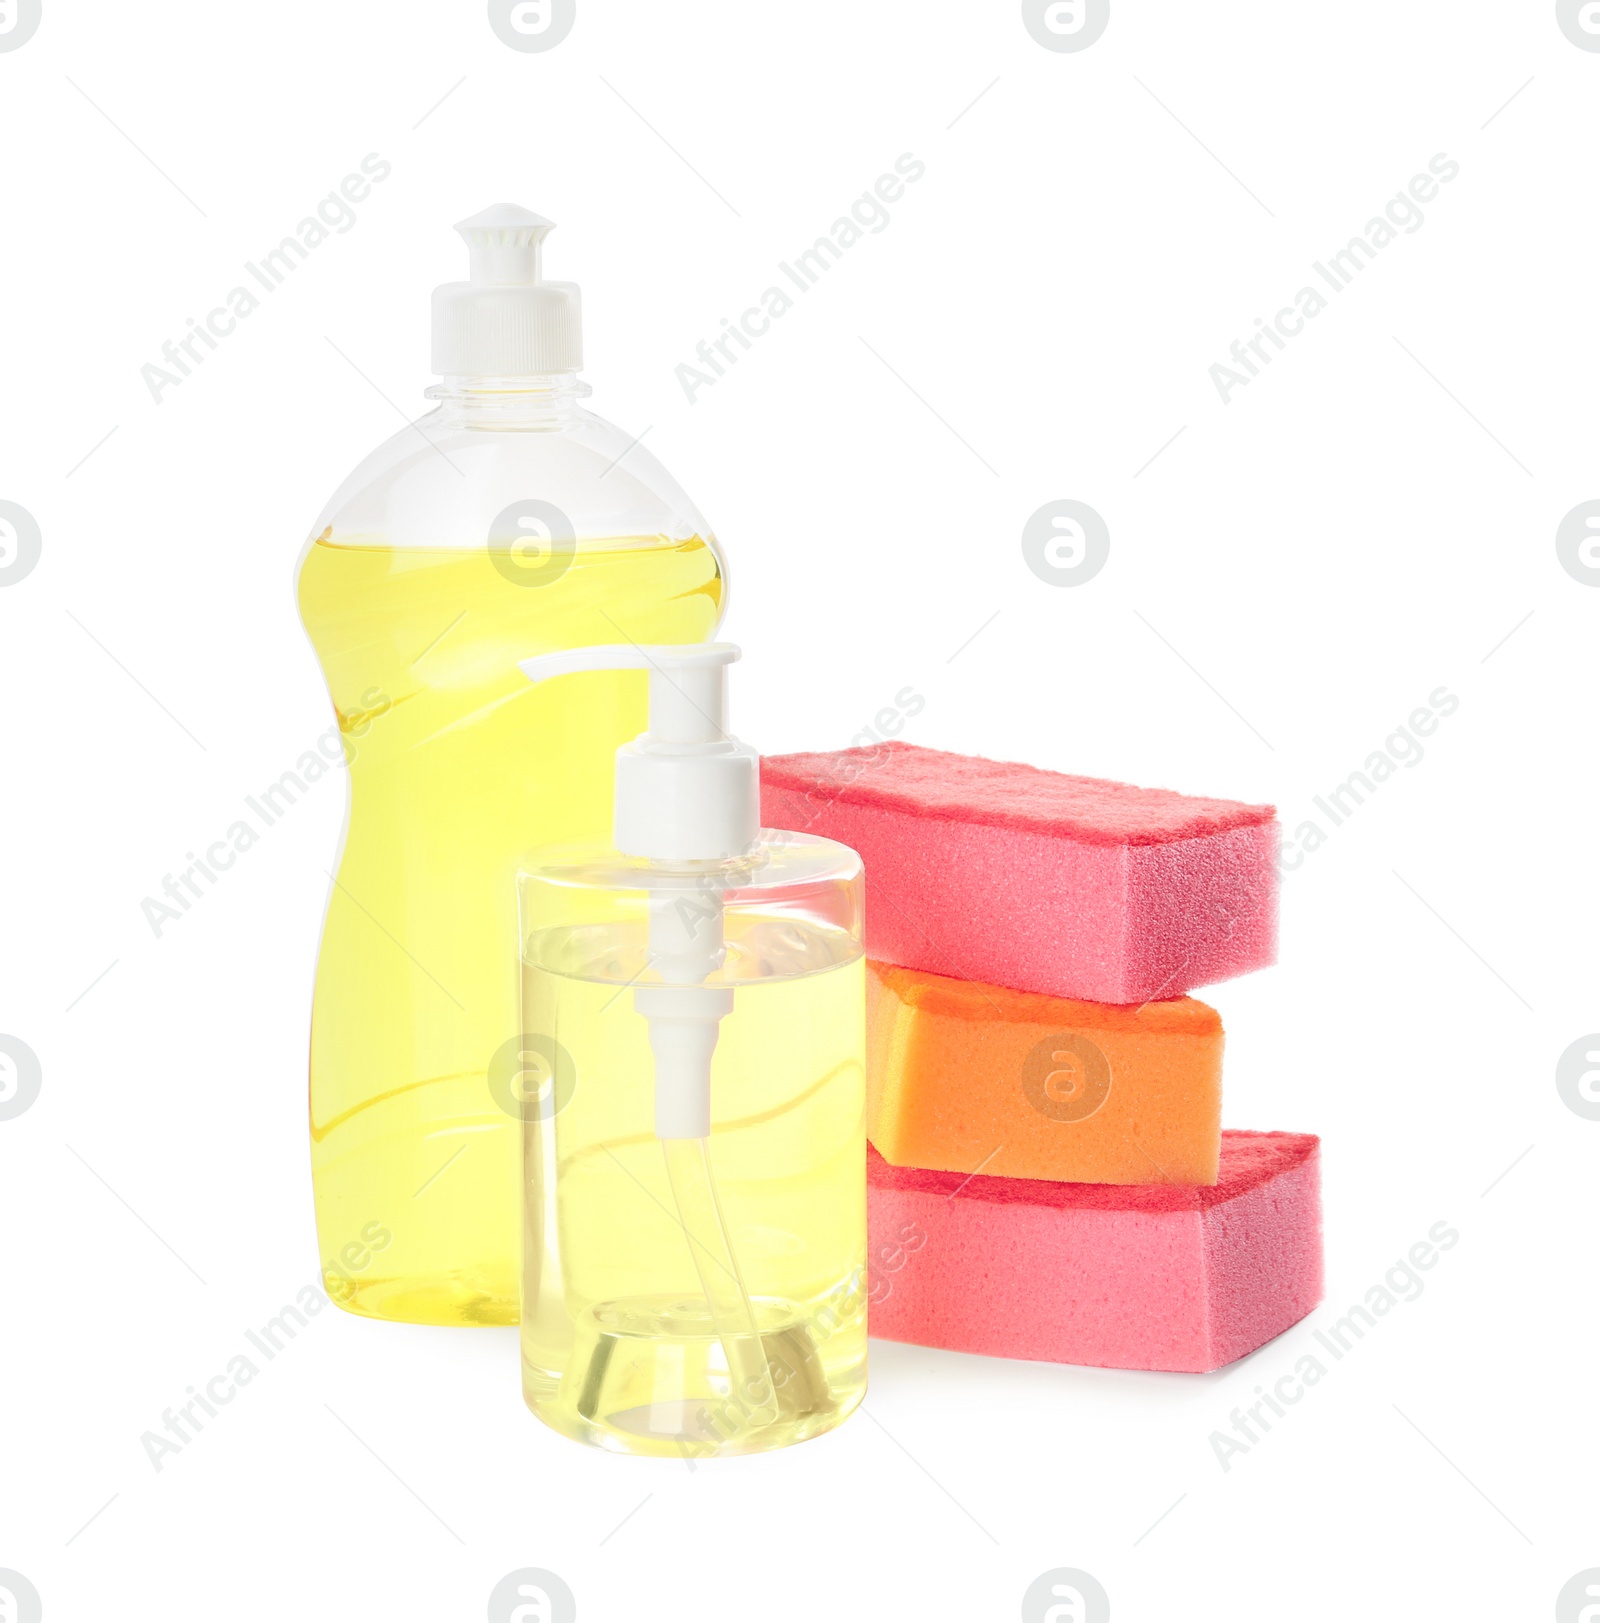 Photo of Cleaning supplies and sponges for dish washing on white background